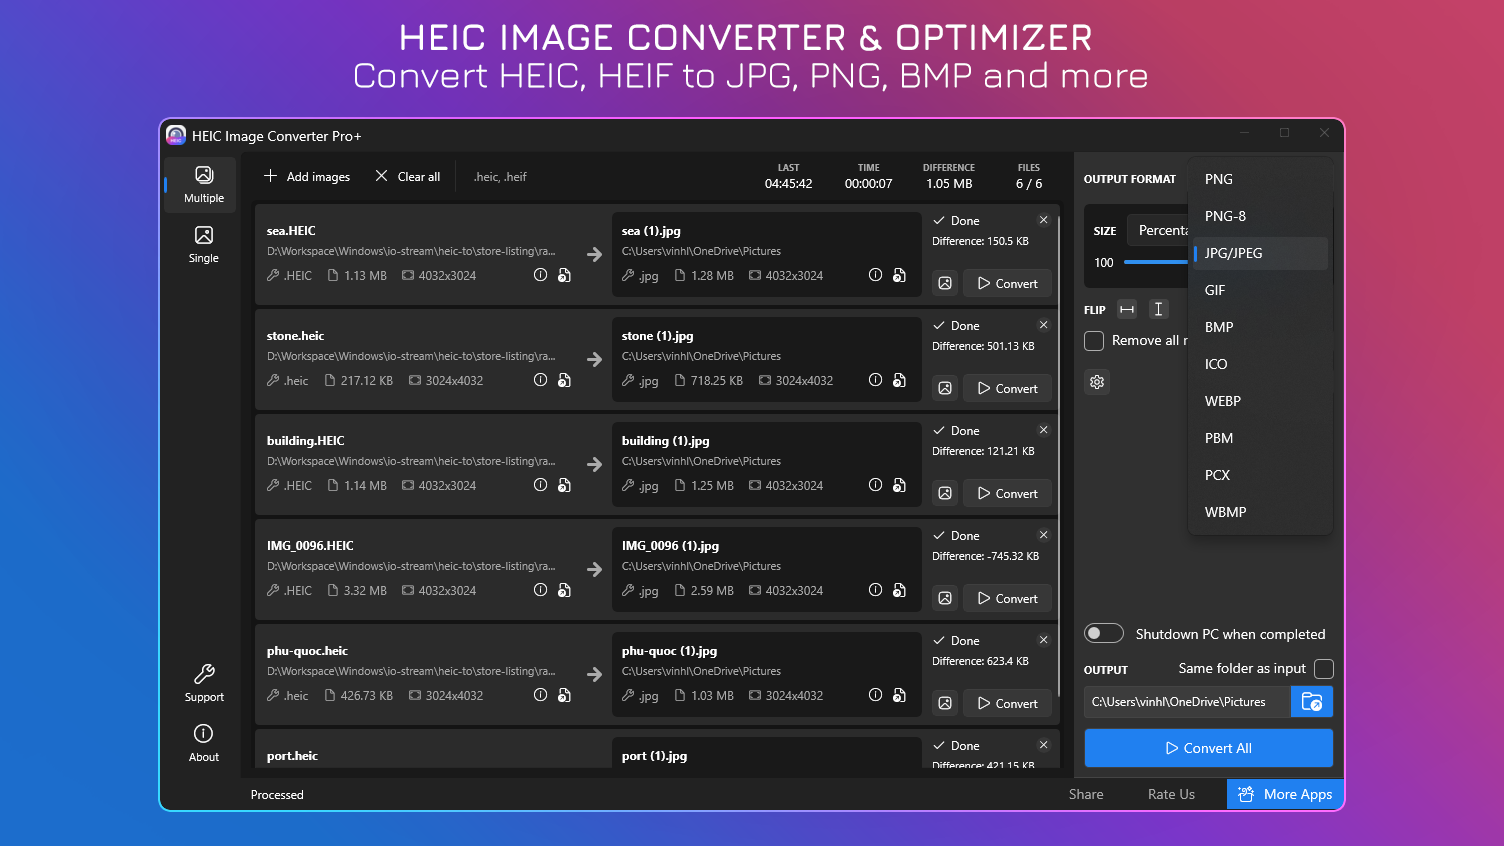 HEIC Image Converter & Optimizer - Convert HEIC, HEIF to JPG, PNG, BMP and more